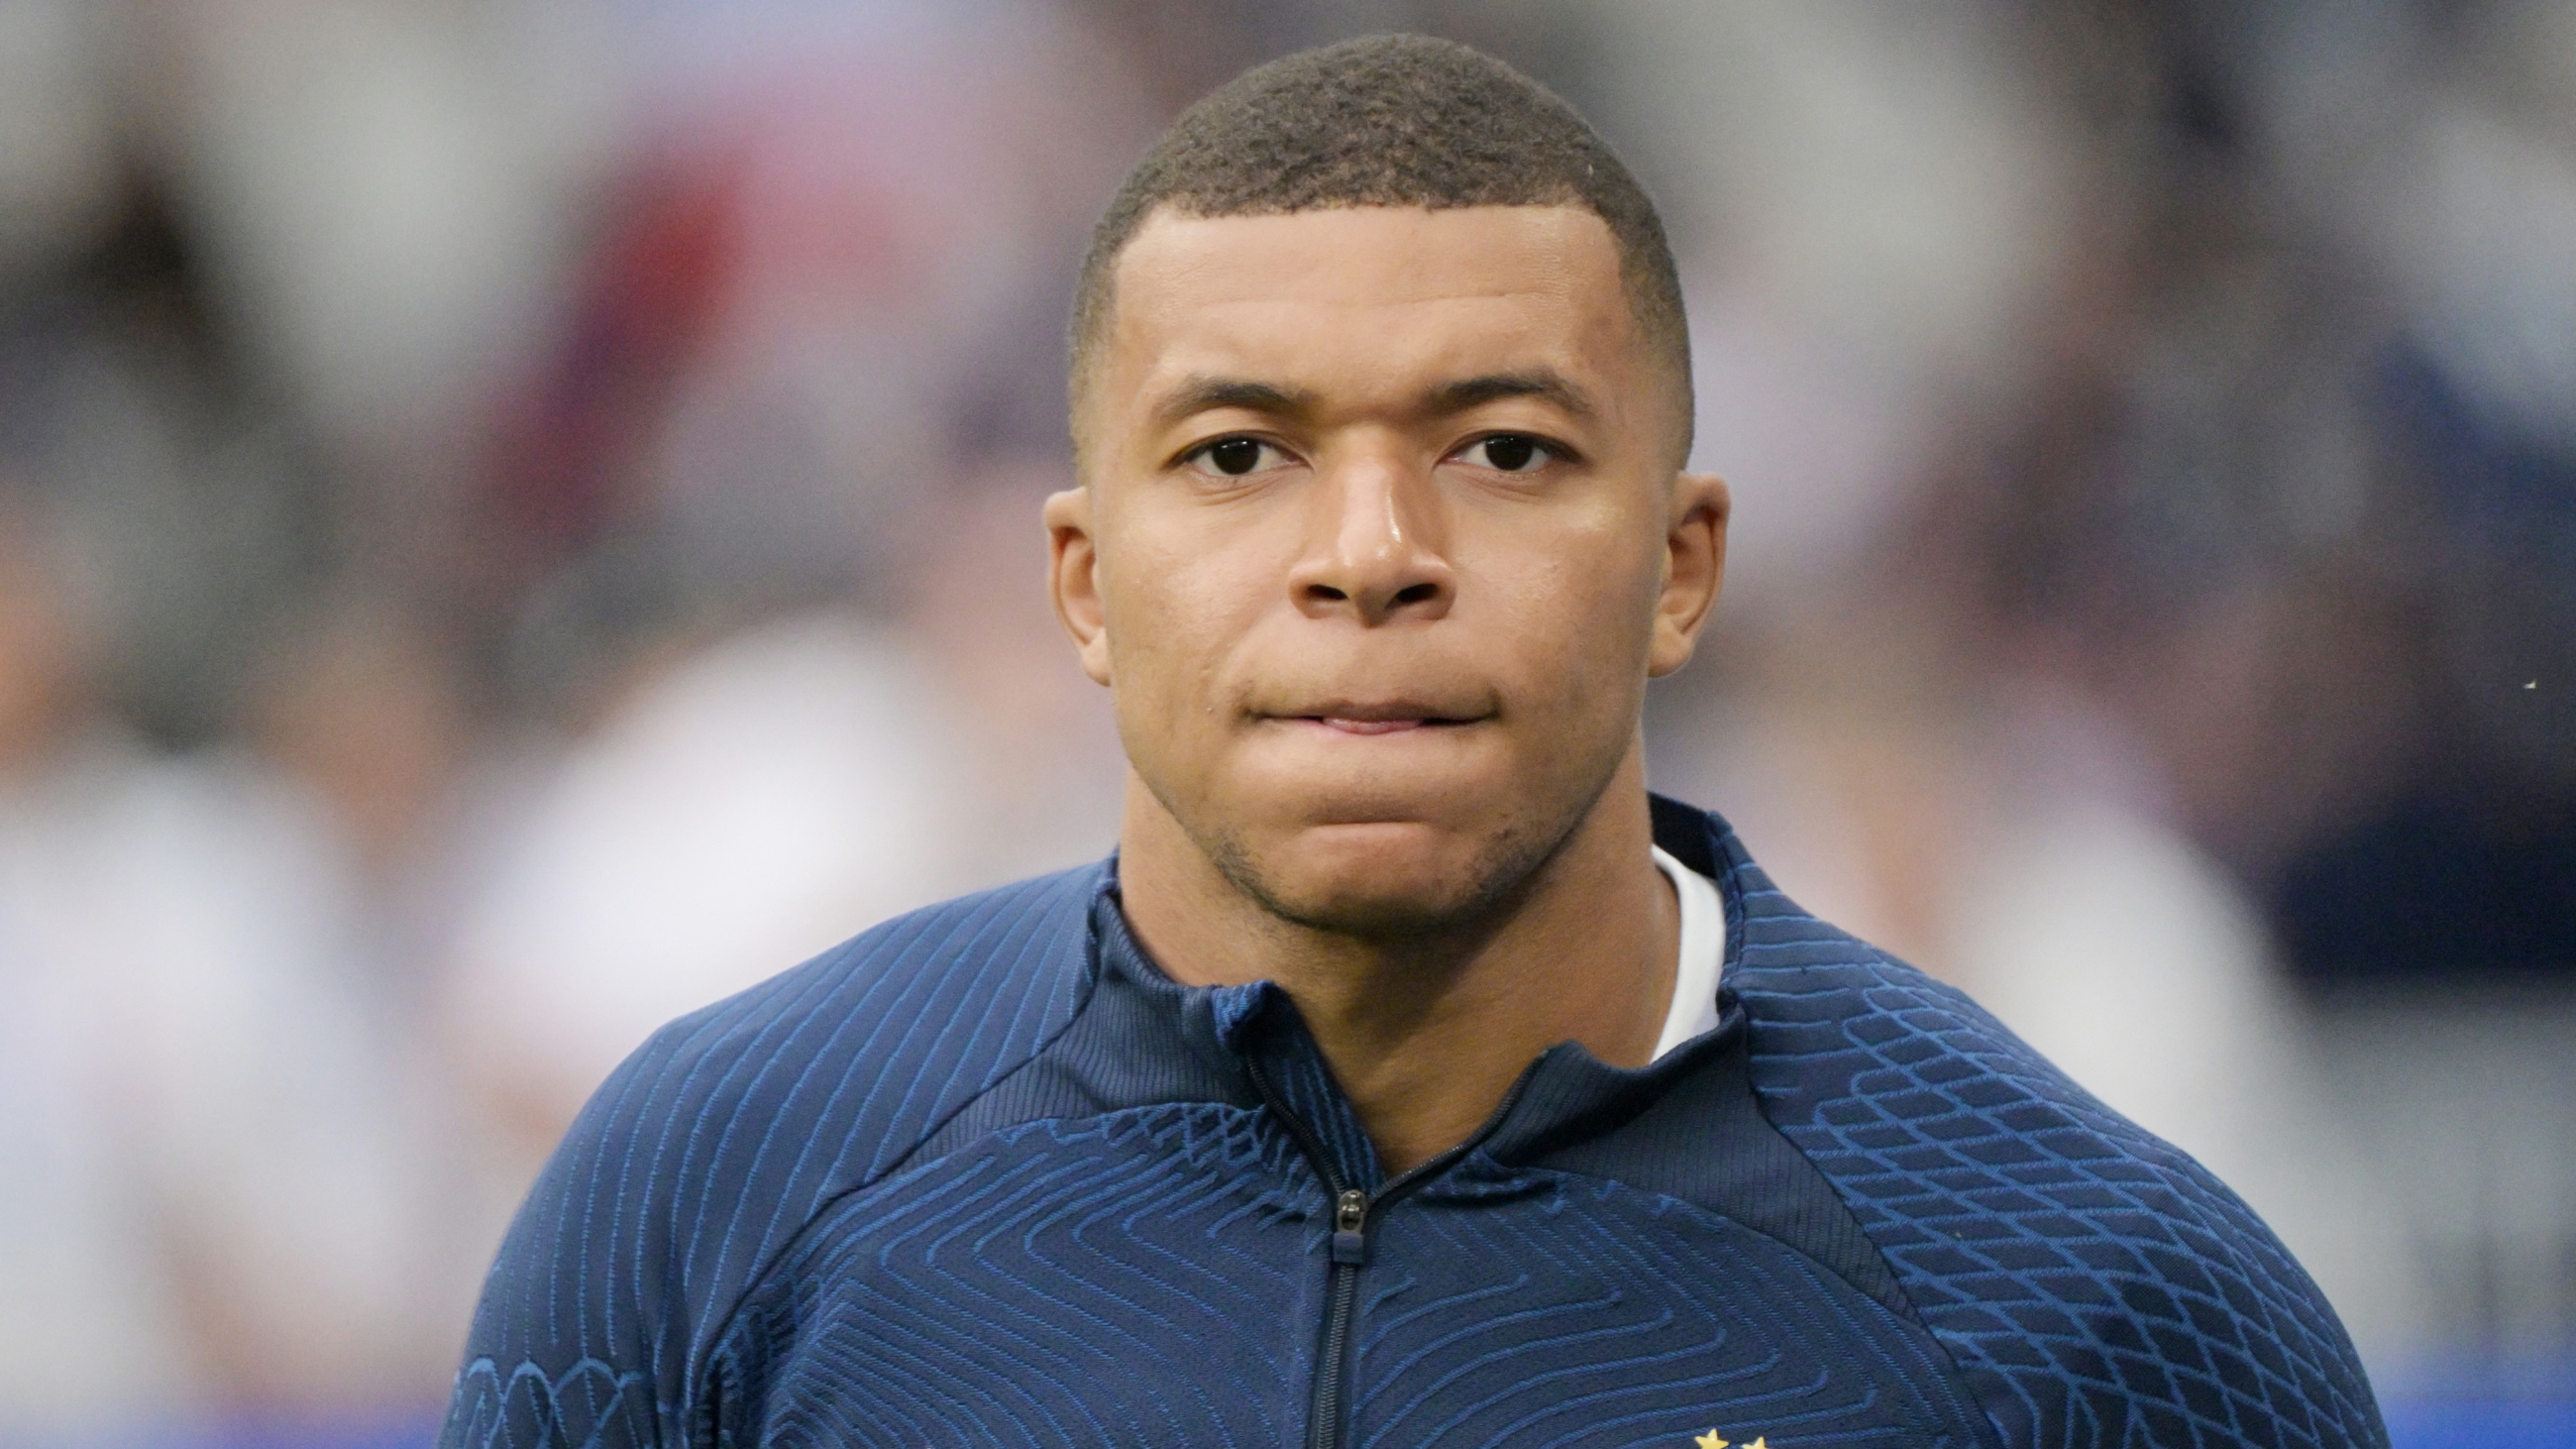 France's forward Kylian Mbappe pictured before a football match between France and Greece on 19 June 2023 (AFP)